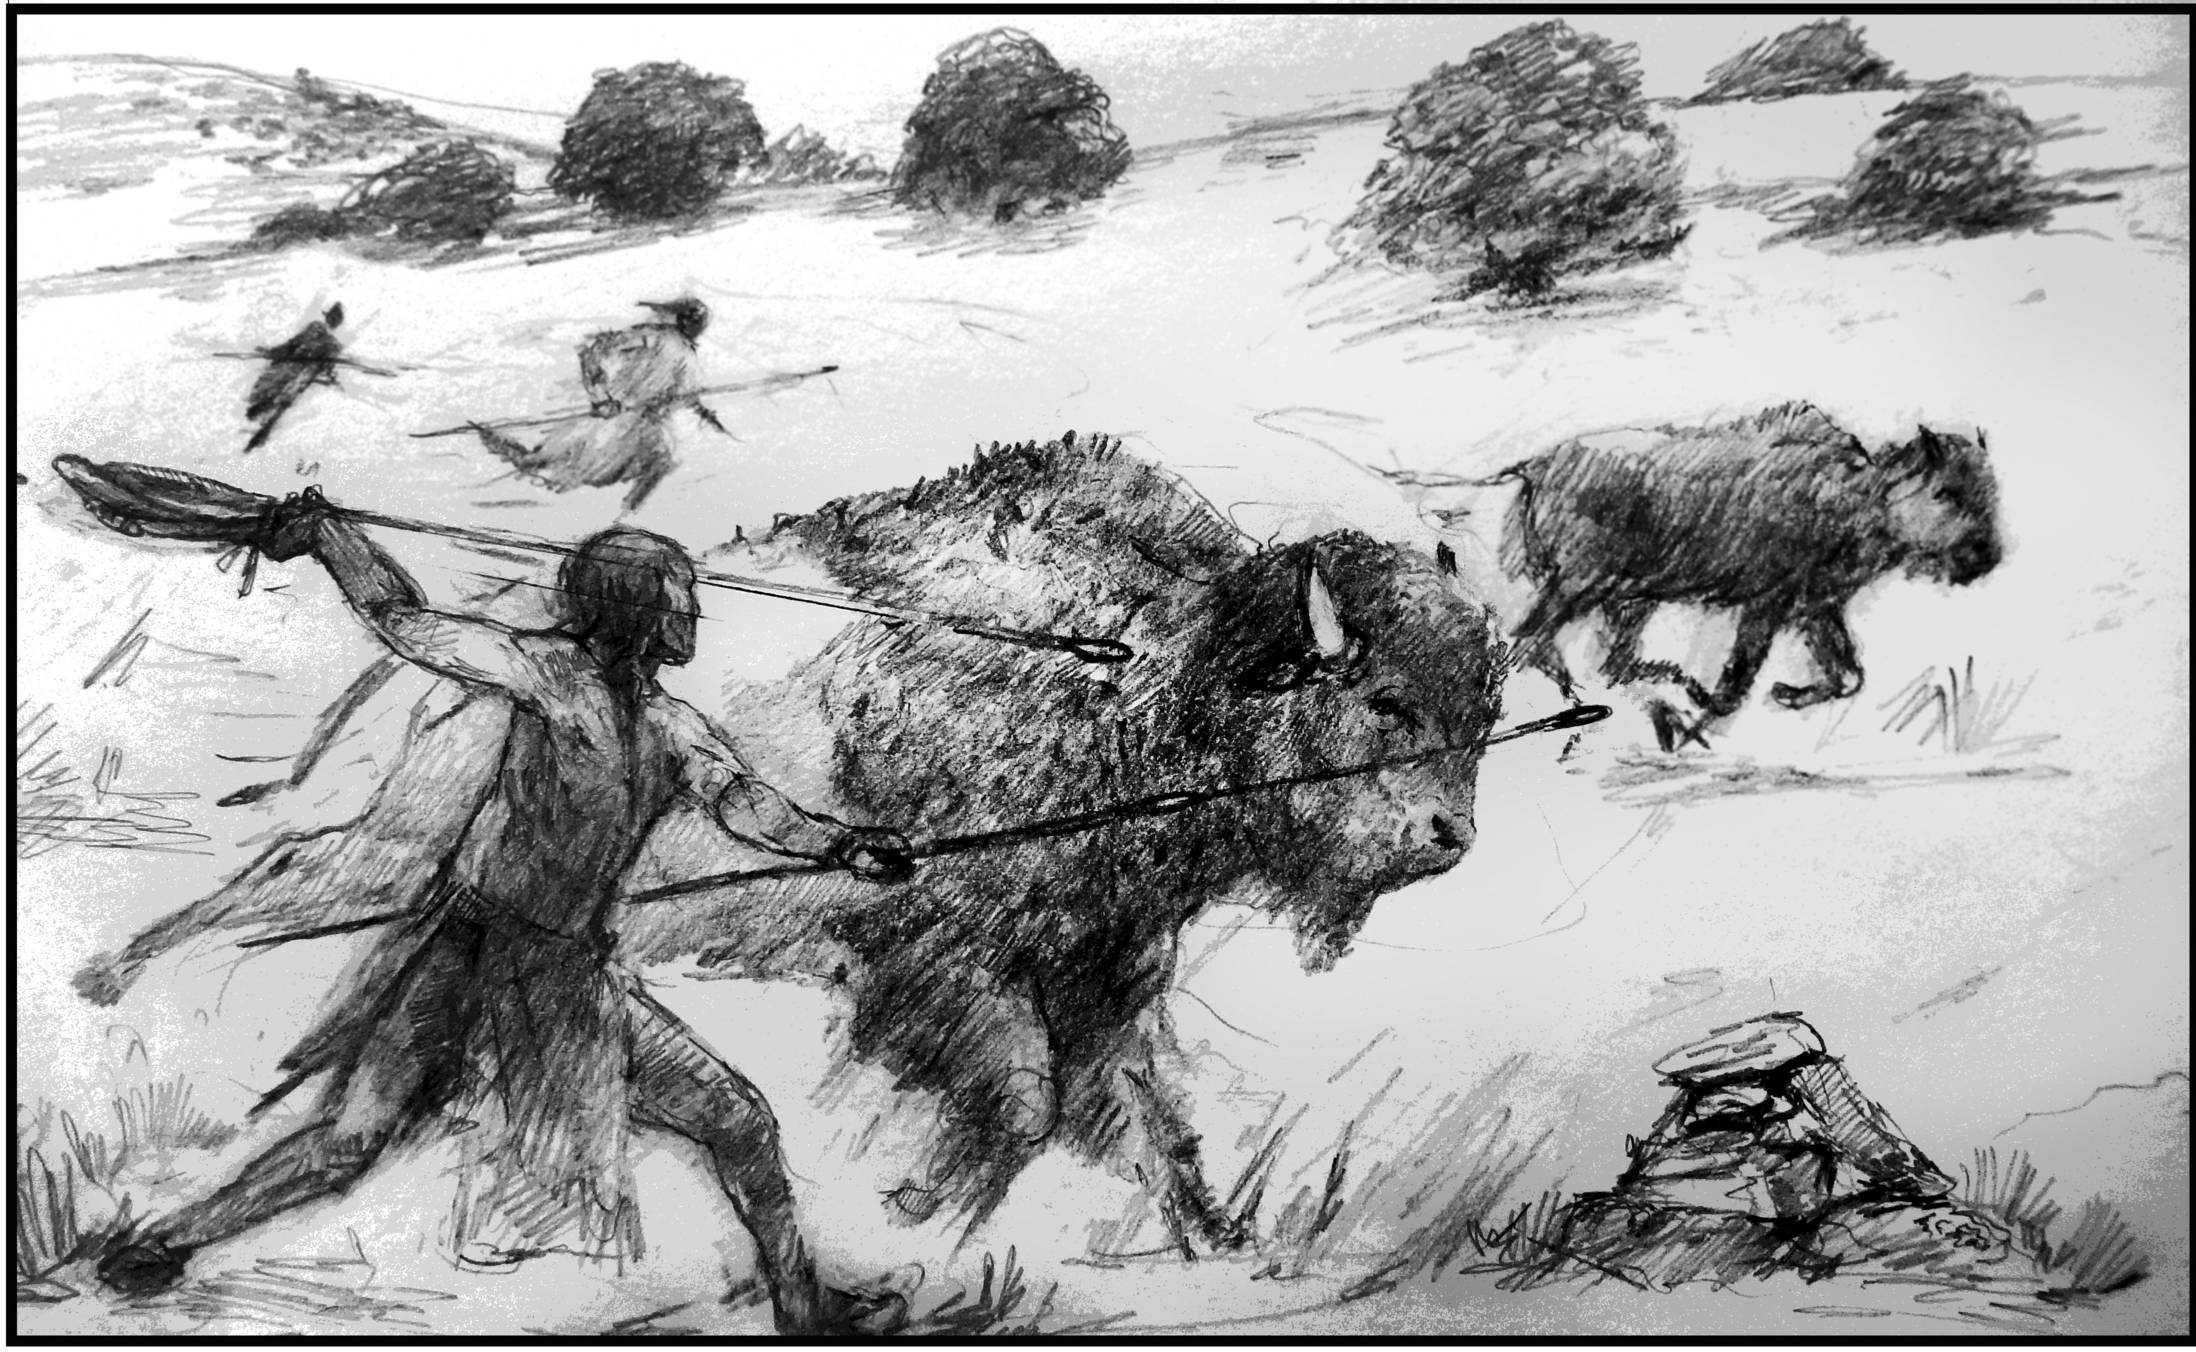 Indigenous people hunting bison. Image by Eric Carlson.